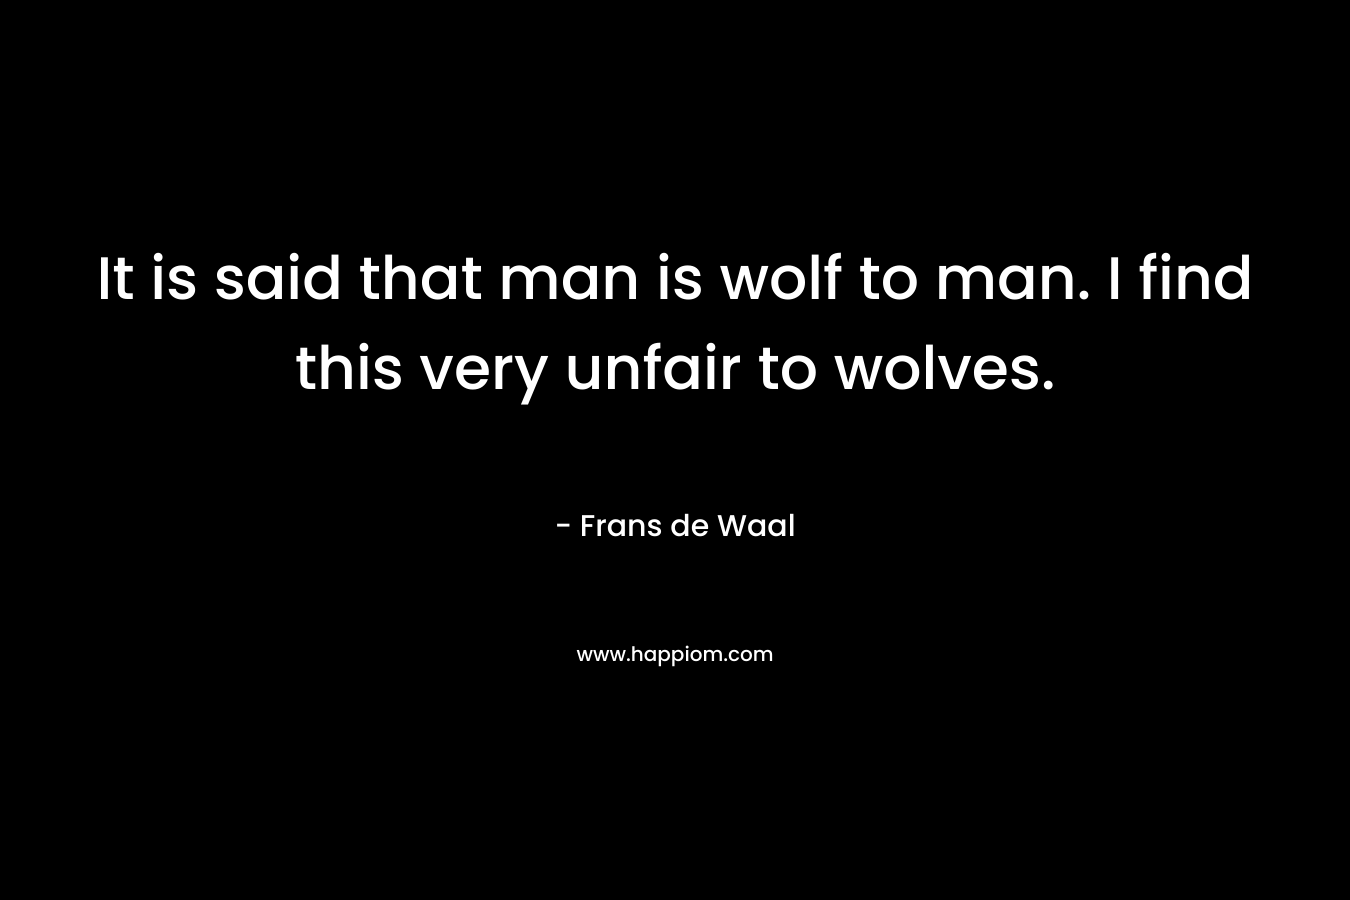 It is said that man is wolf to man. I find this very unfair to wolves.